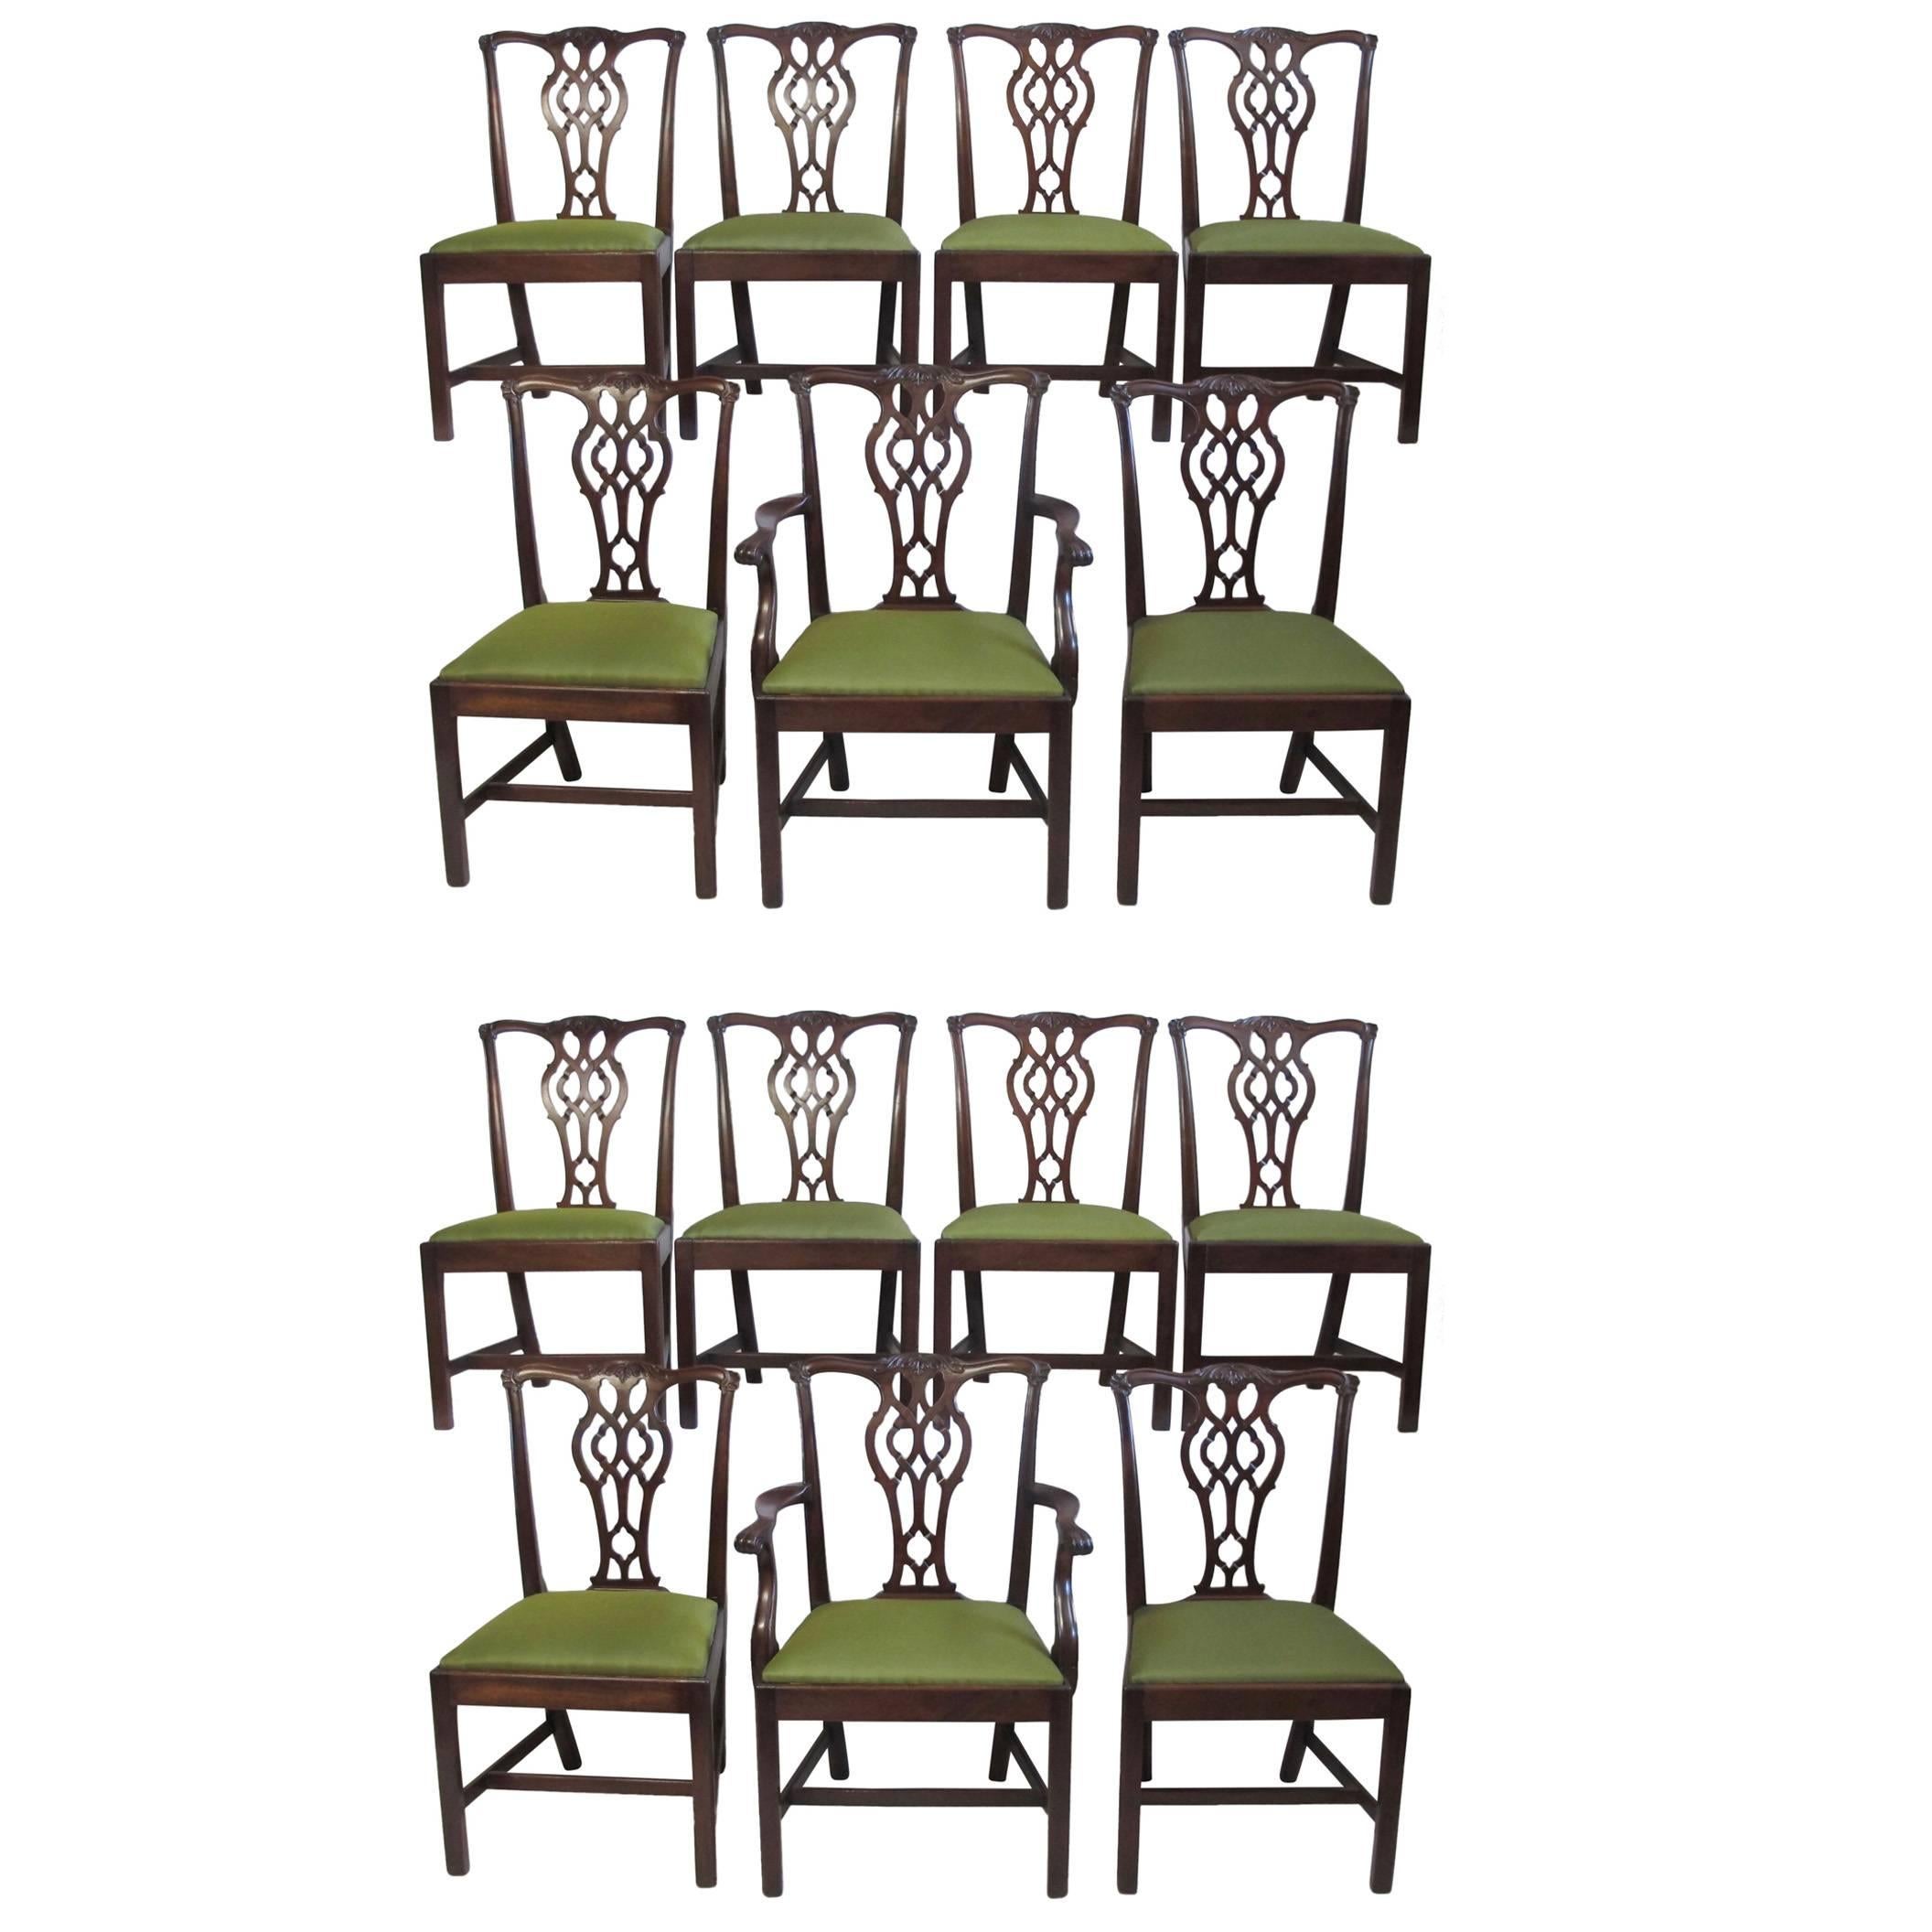 Set of 14 Mahogany Chippendale Dining Chairs